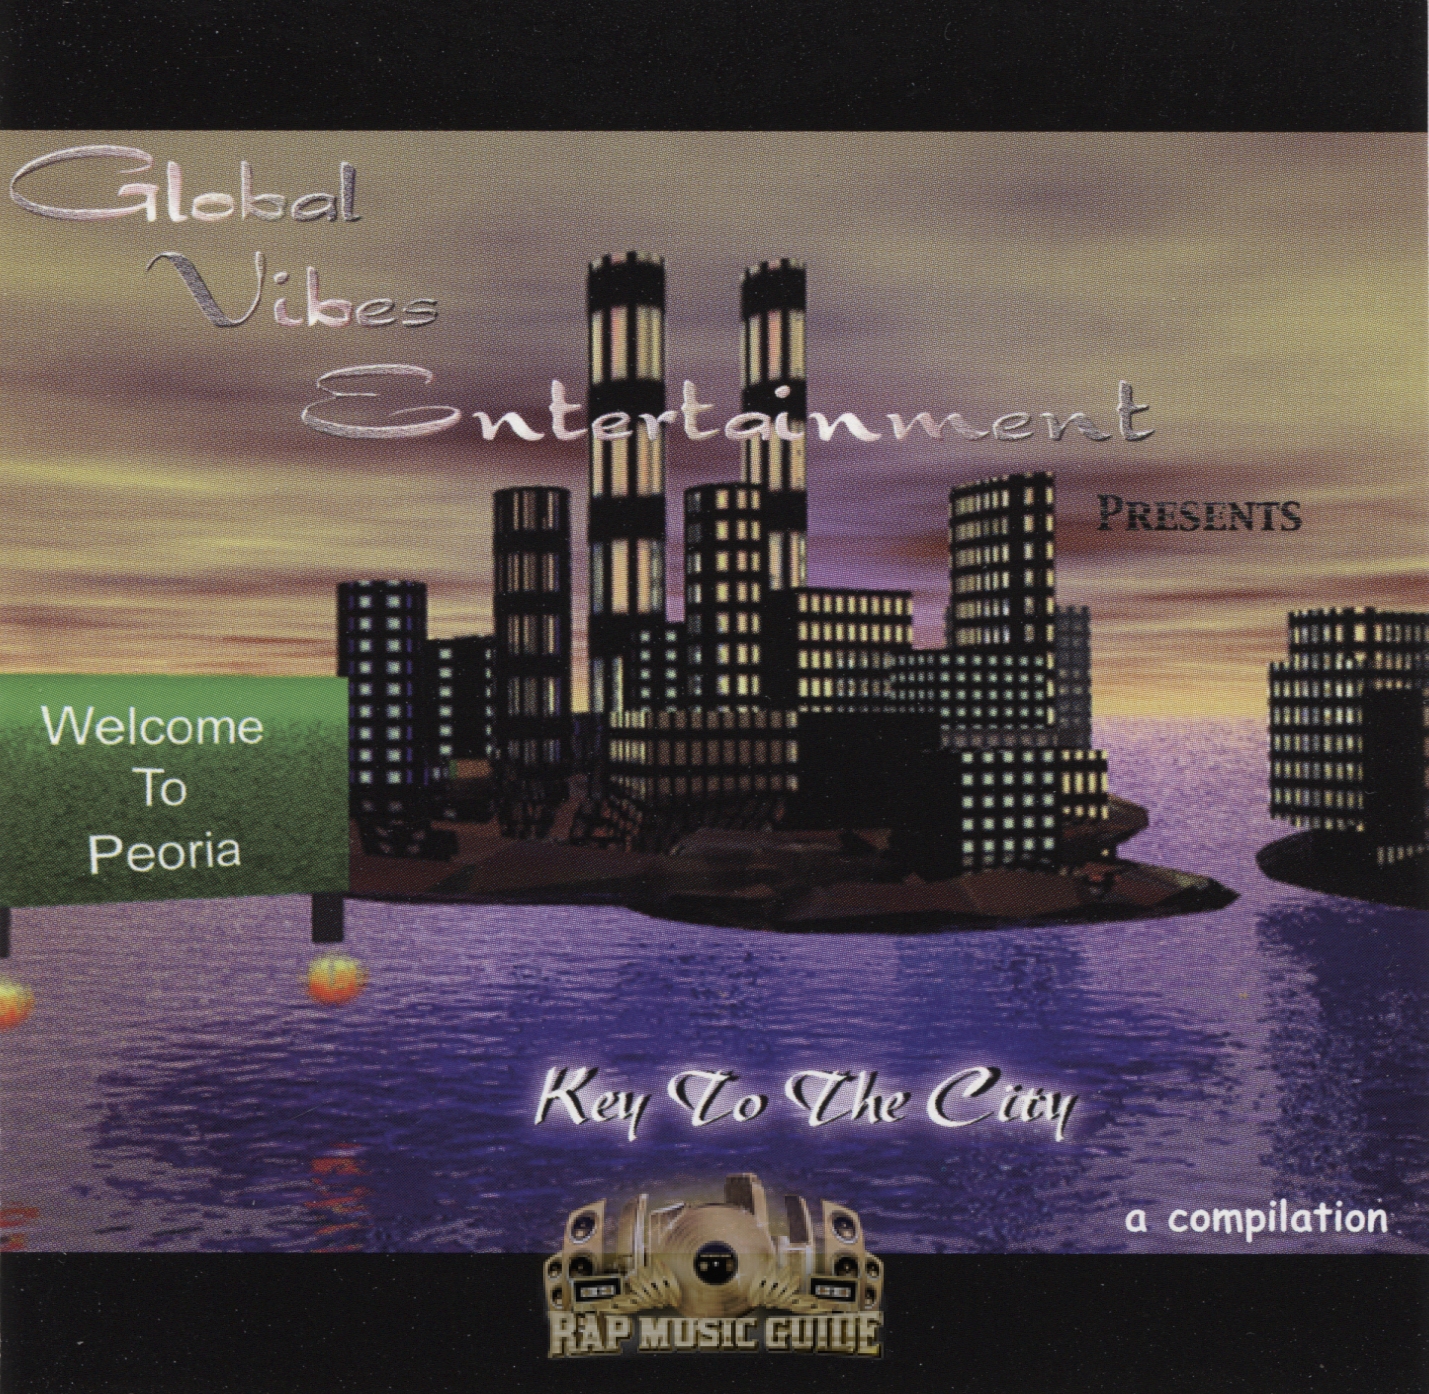 Various Artists - Global Vibes Entertainment Presents Key To The City (1999) FLAC Download